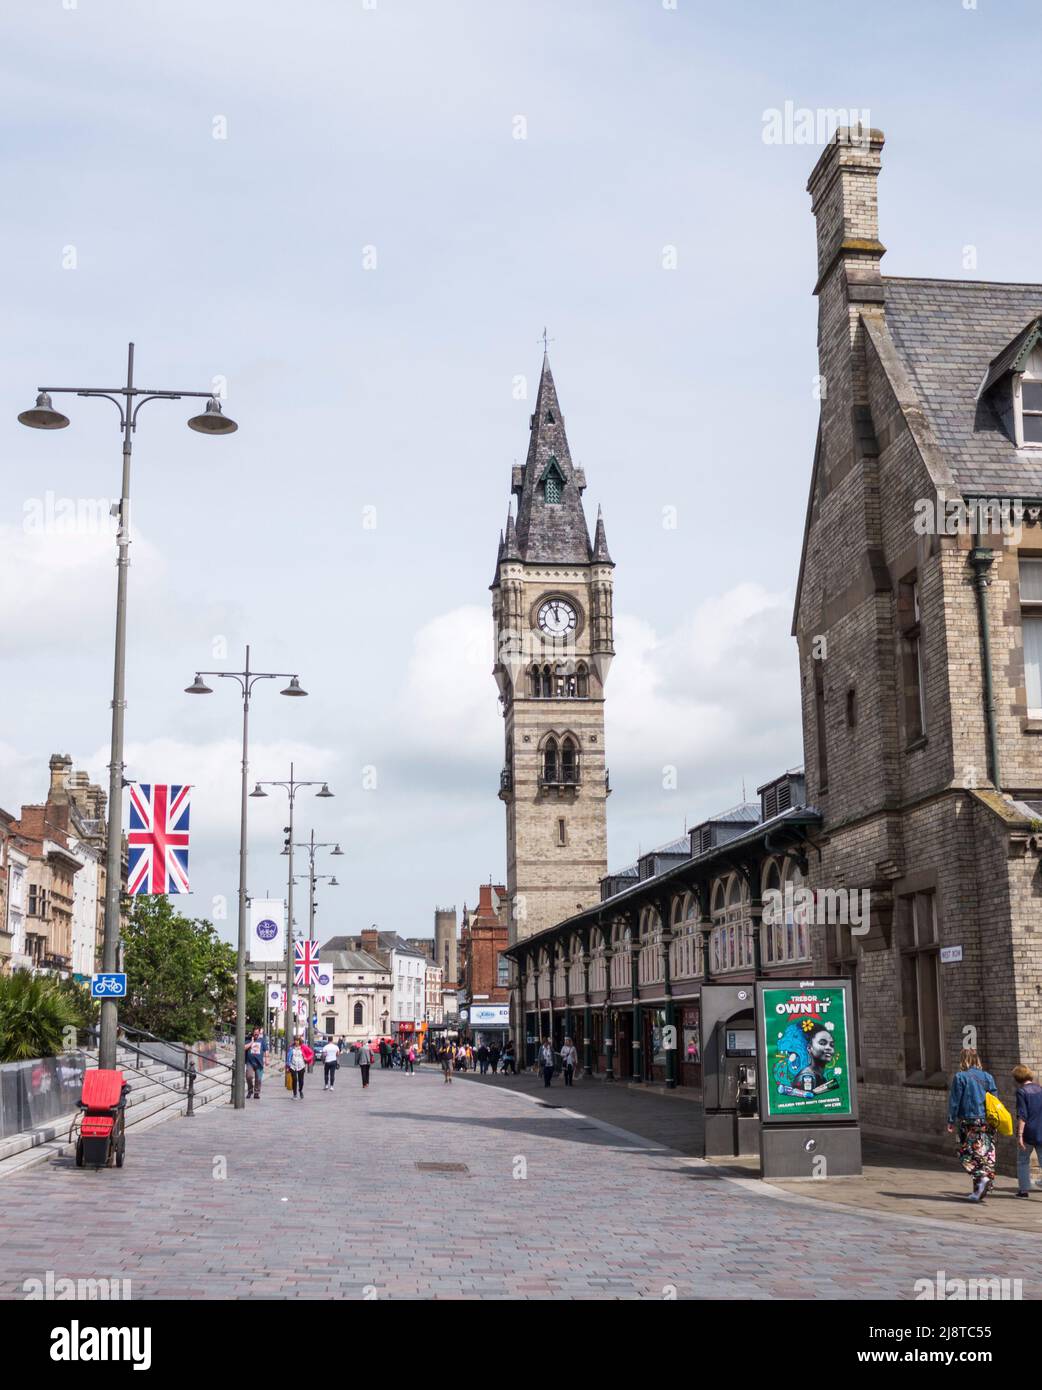 A view of the town clock and indoor market in Darlington in the north east of England Stock Photo